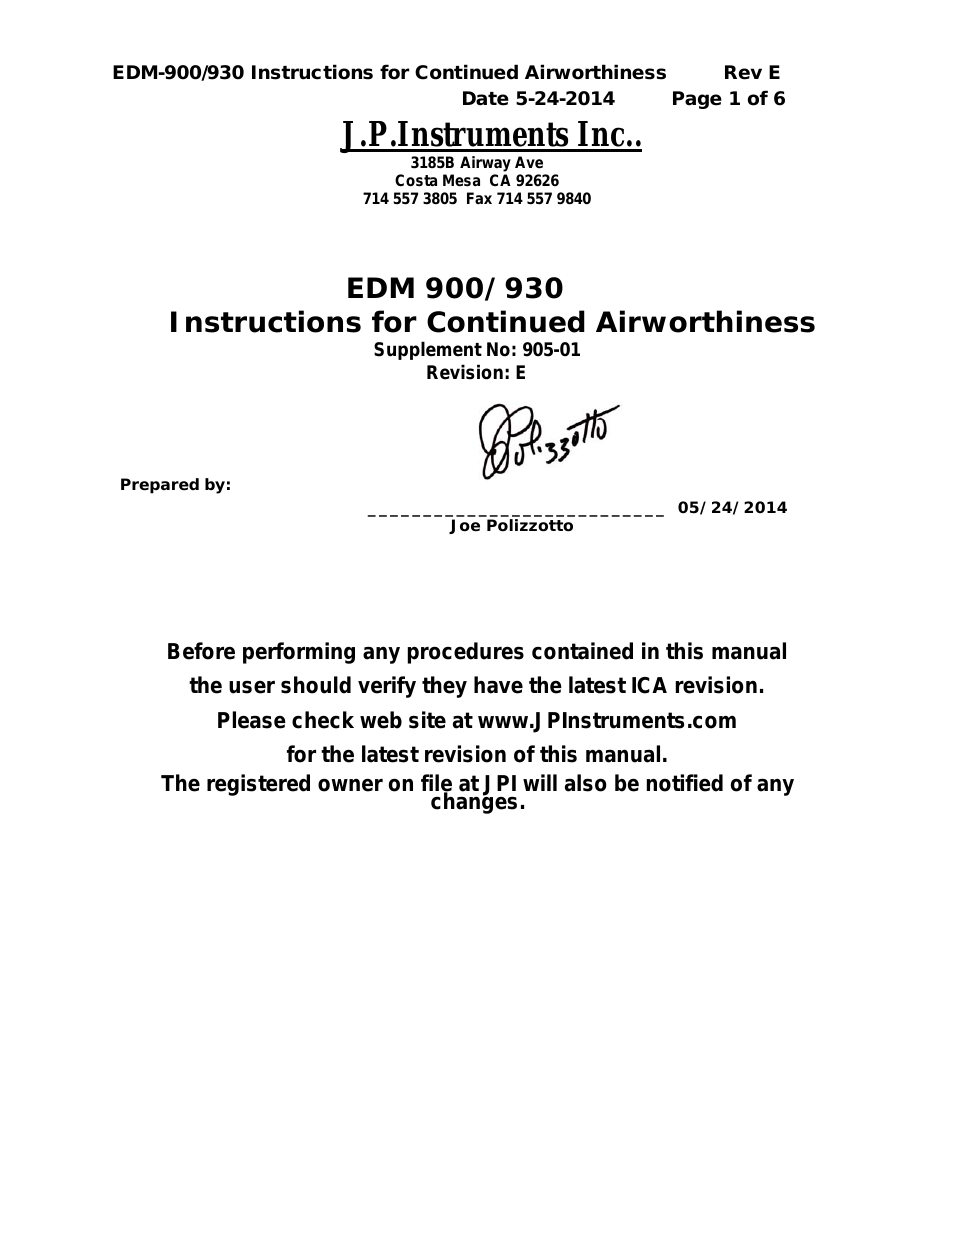 EDM 900 Instructions for Continued Airworthiness